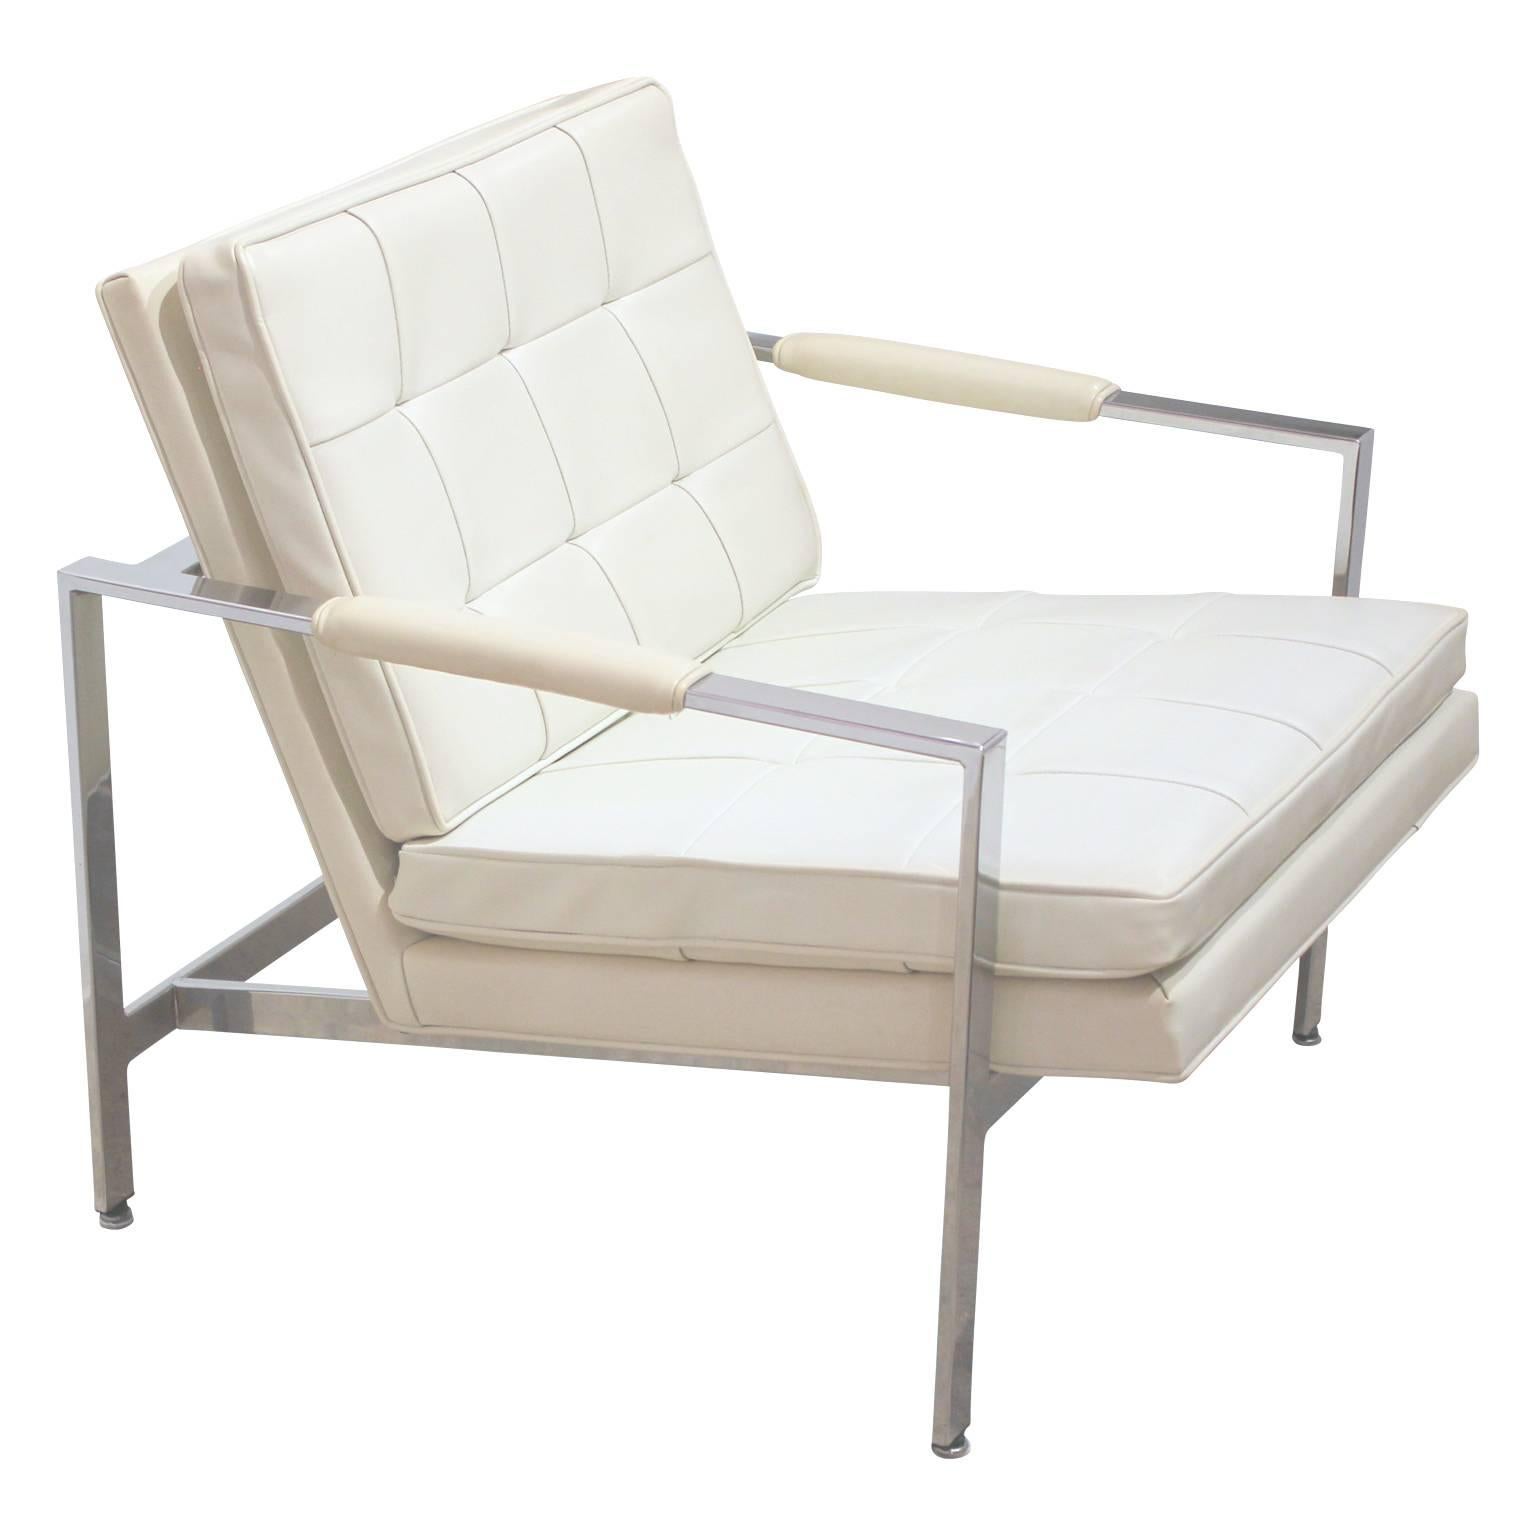 Gorgeous pair of white naugahyde and chrome lounge chairs by Milo Baughman. Perfect for any modern or mid-mod home. 